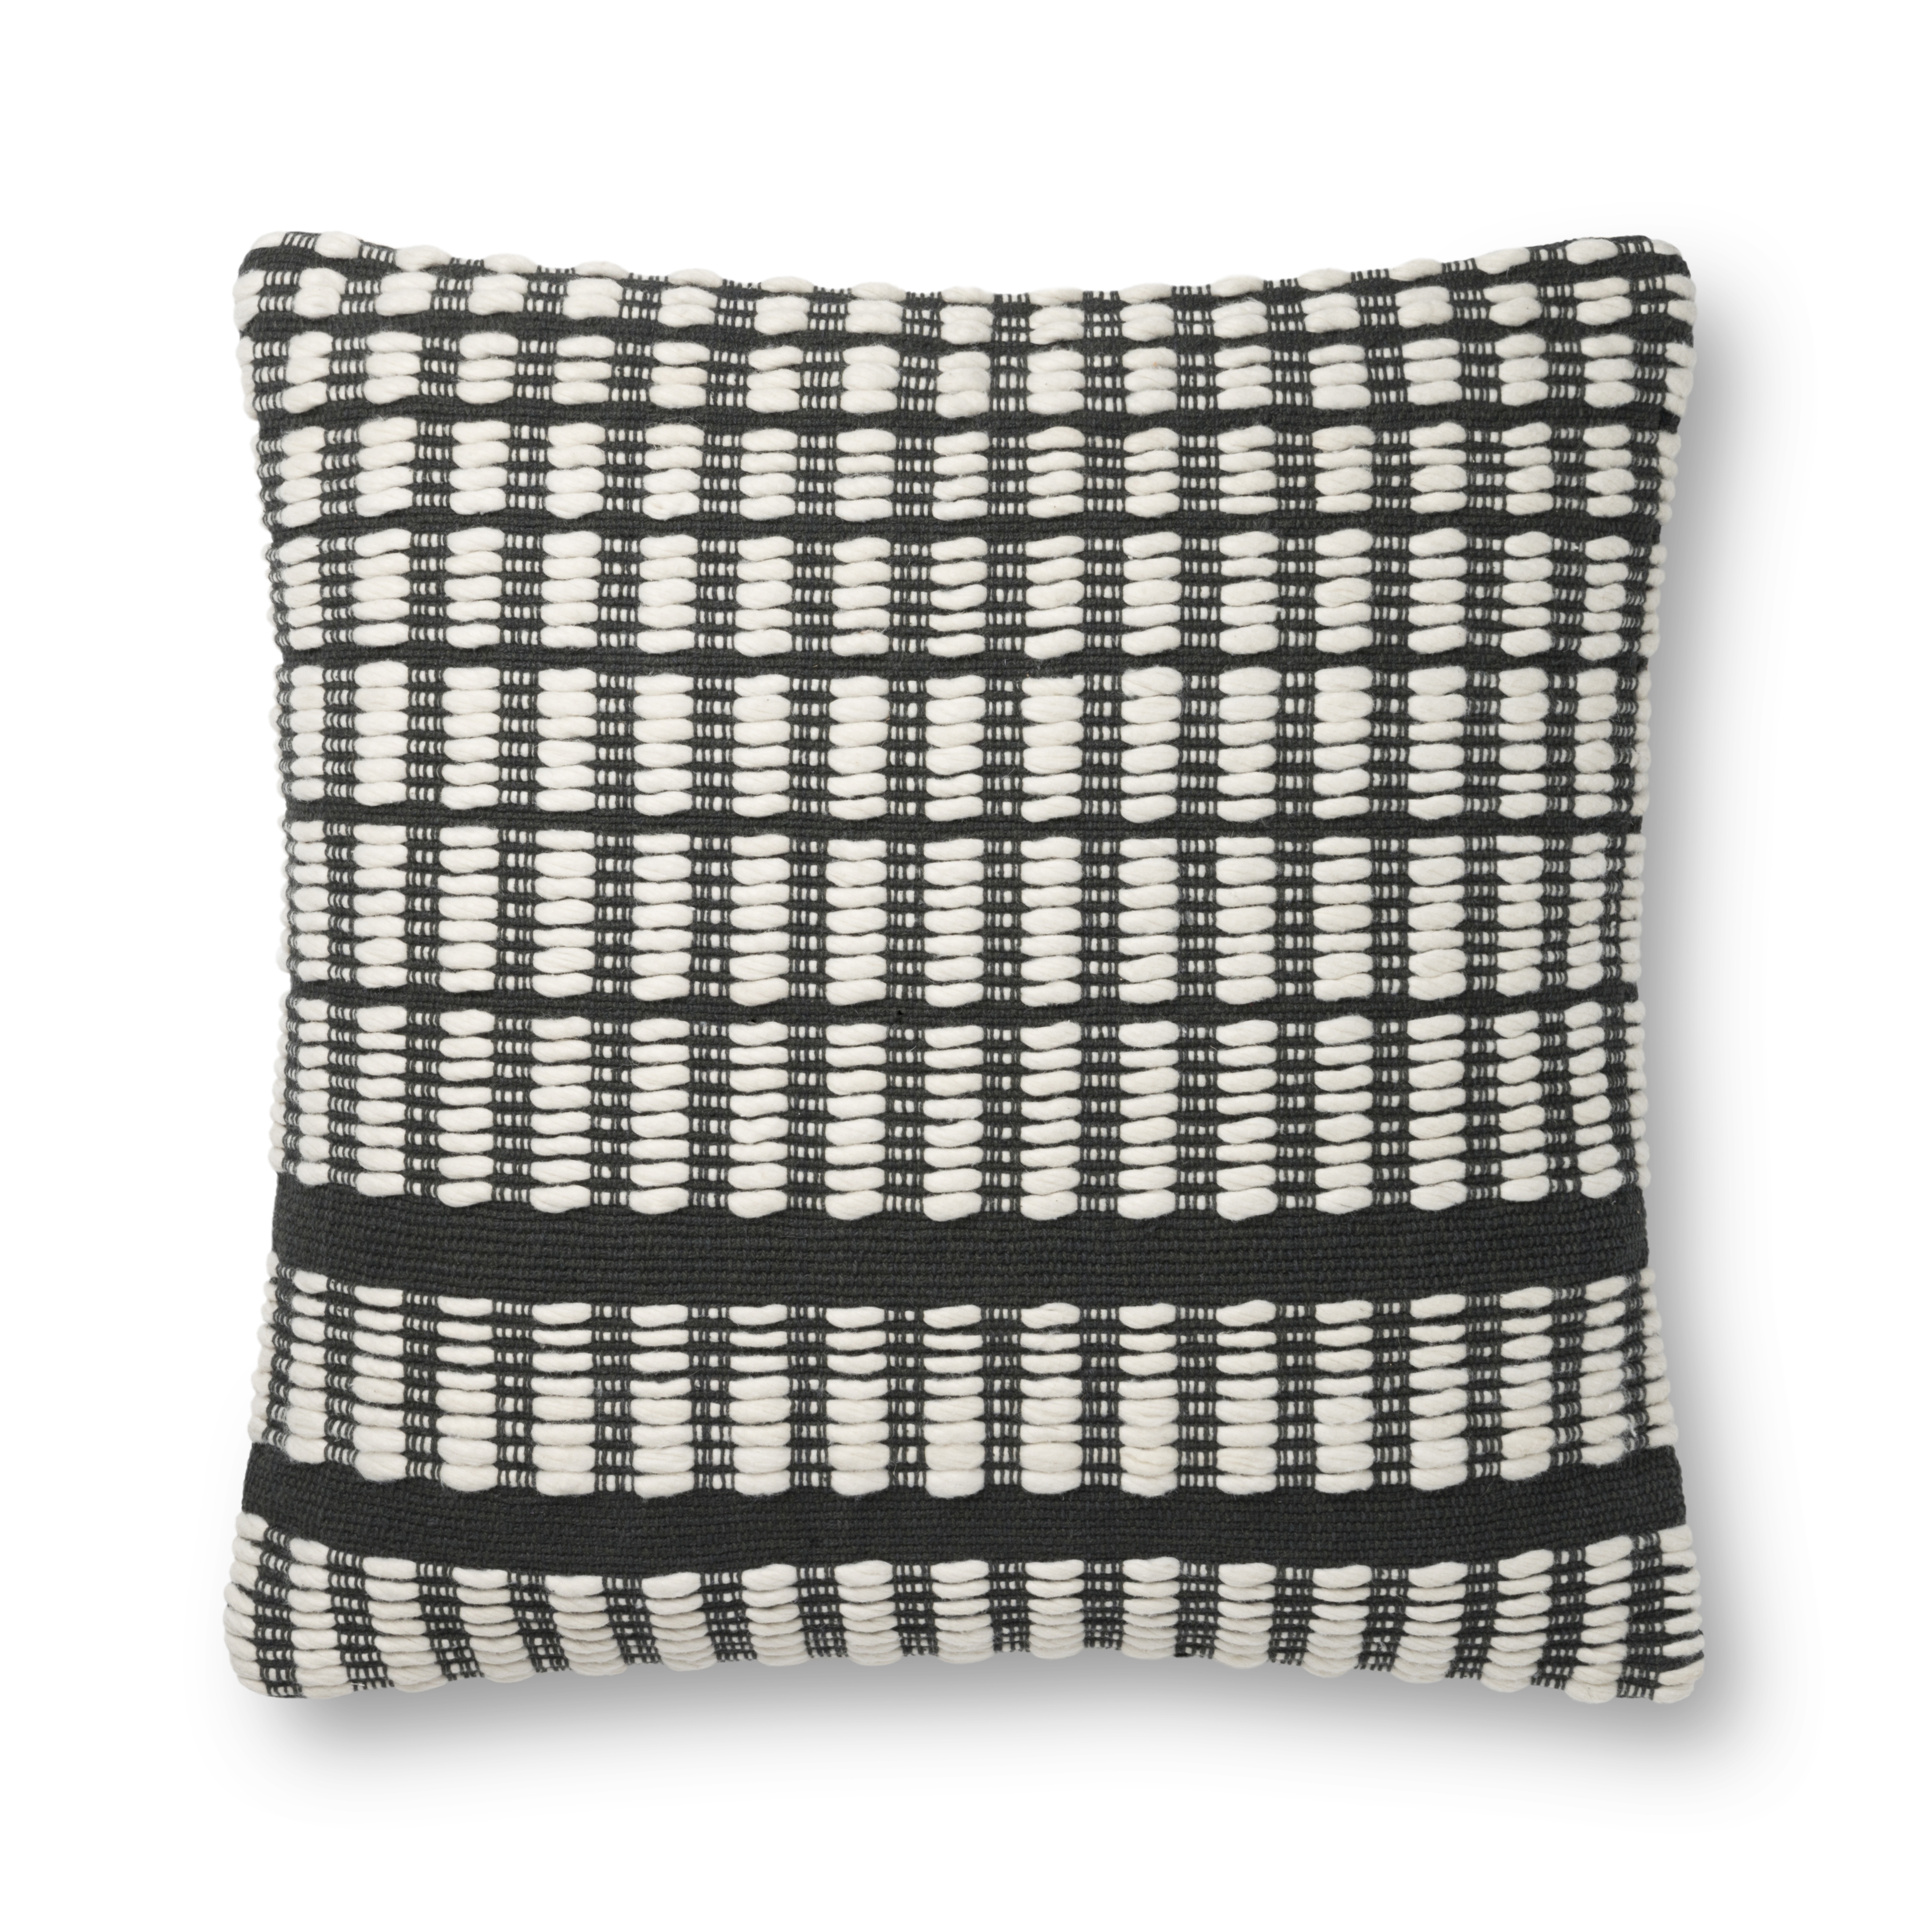 Magnolia Home by Joanna Gaines x Loloi Pillows P1119 Black / Ivory 22" x 22" Cover Only - Image 0